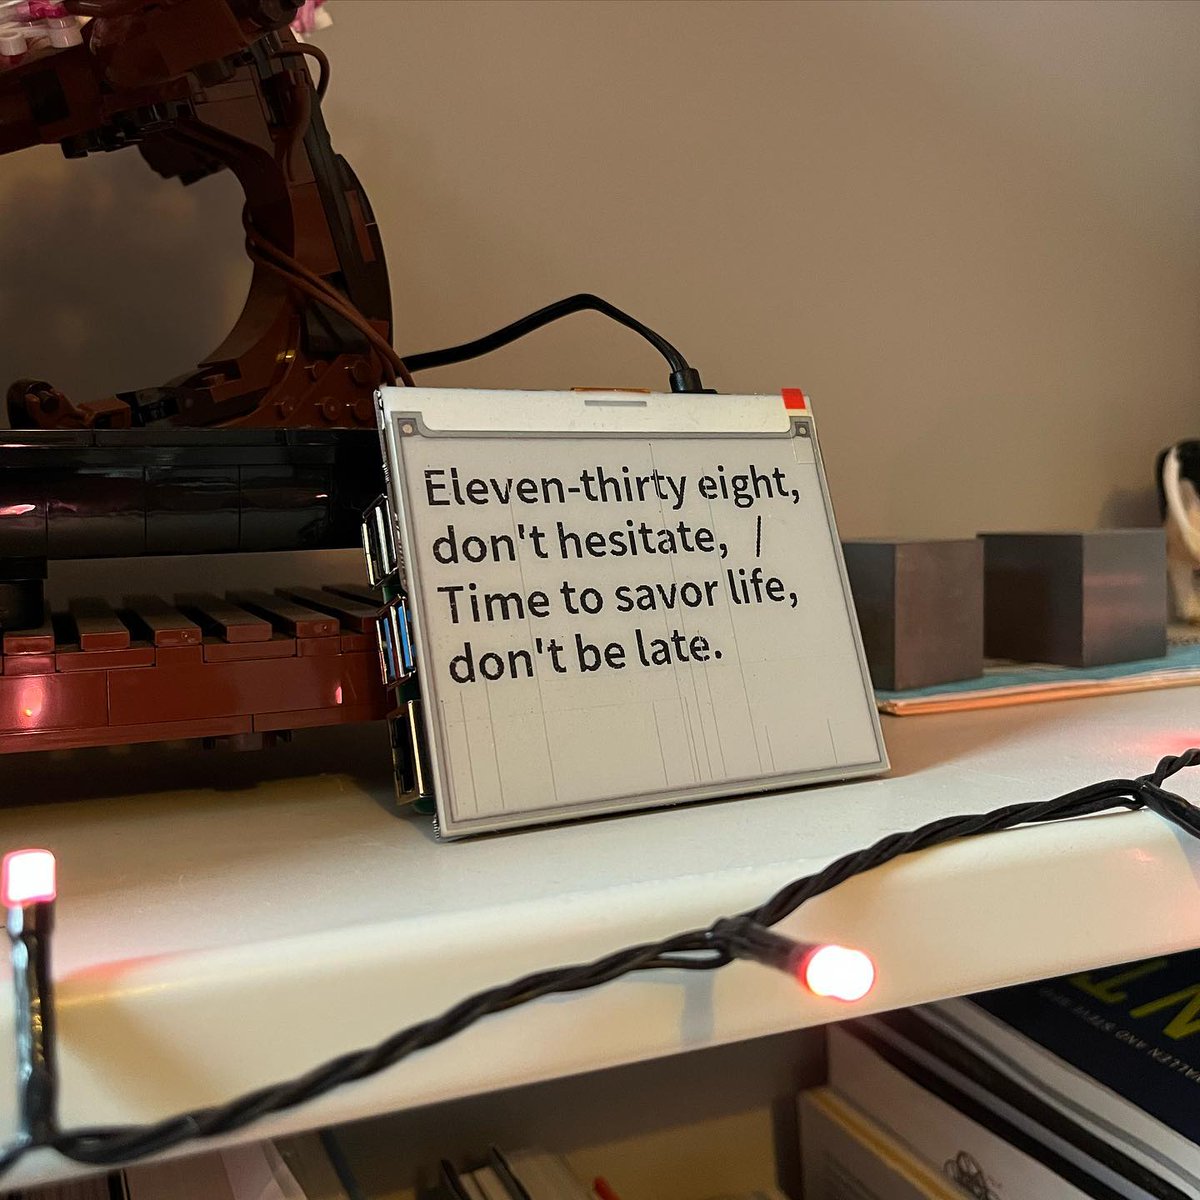 An e-ink screen on a shelf with the text: eleven-thirty eight, don't hesitate, Time to savor life, don't be late.